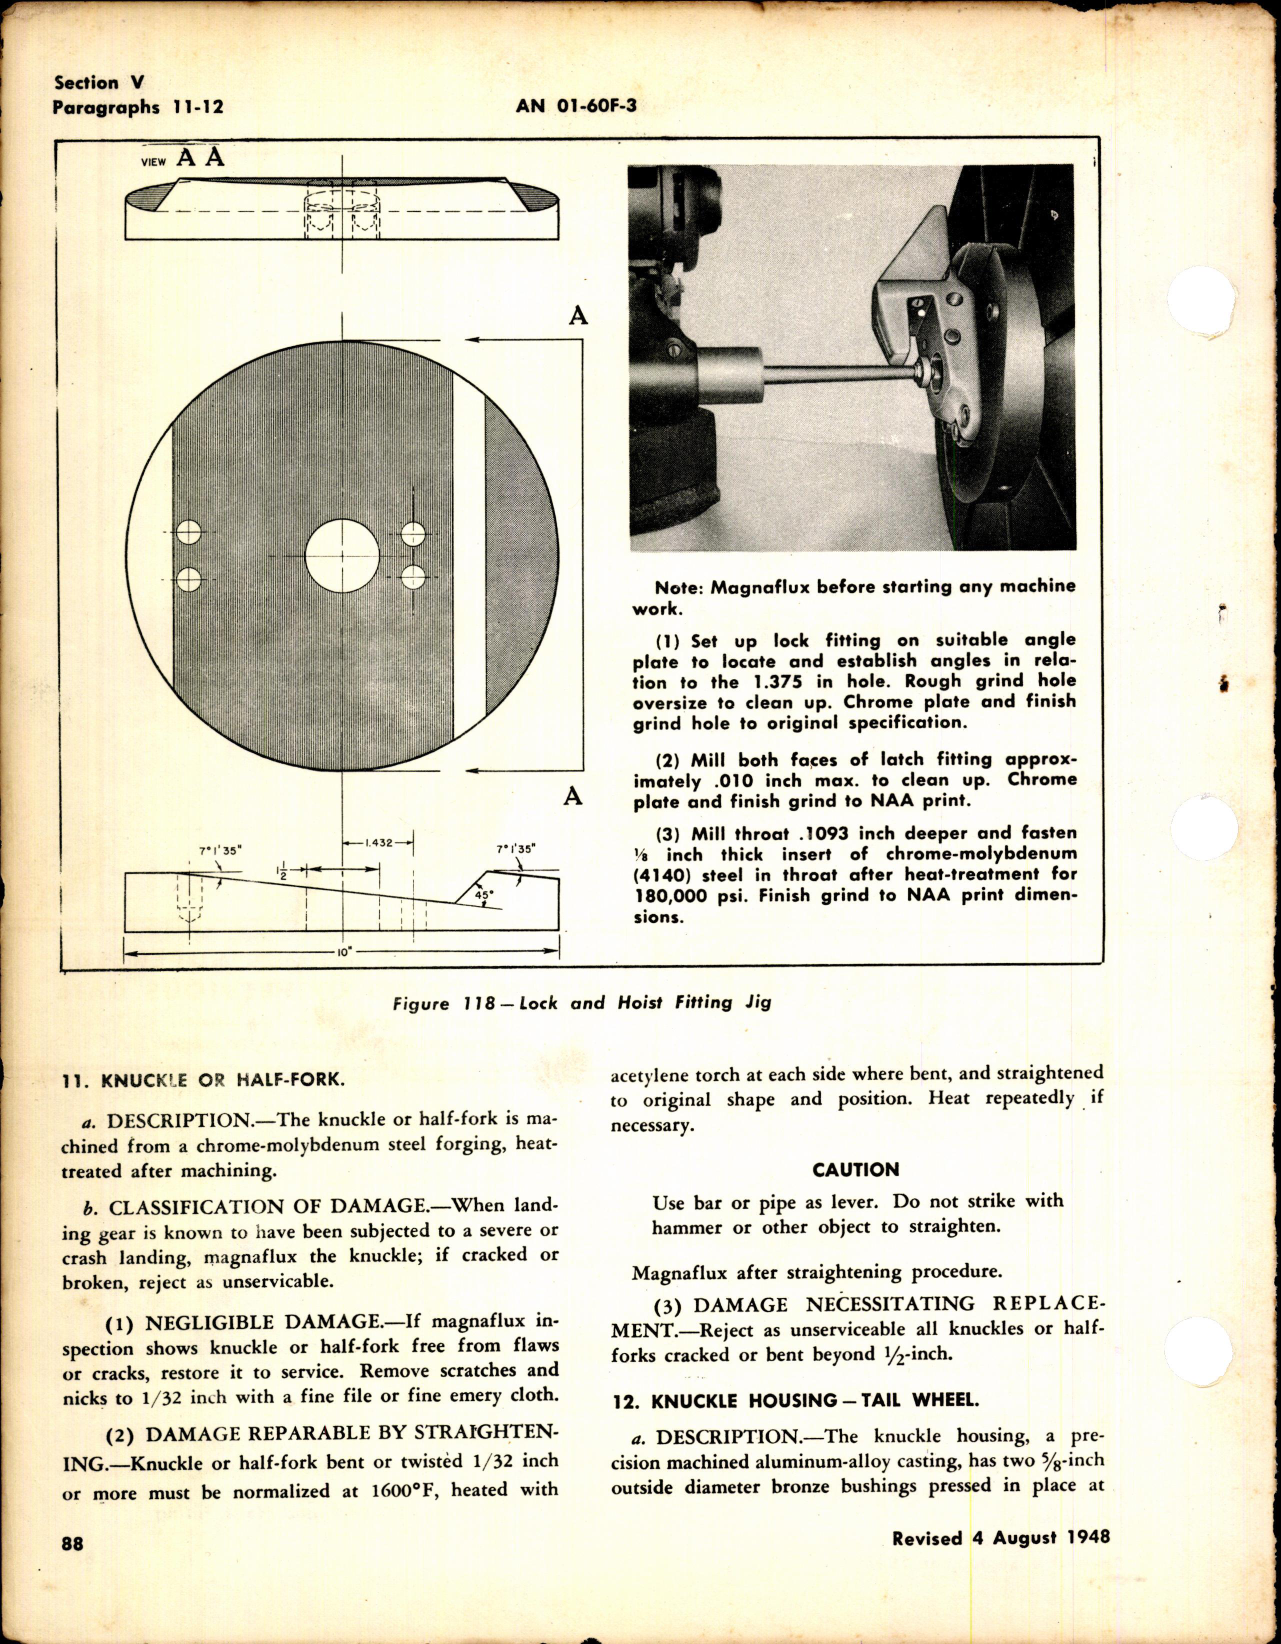 Sample page 4 from AirCorps Library document: Structural Repair Instructions for T-6 (AT-6)